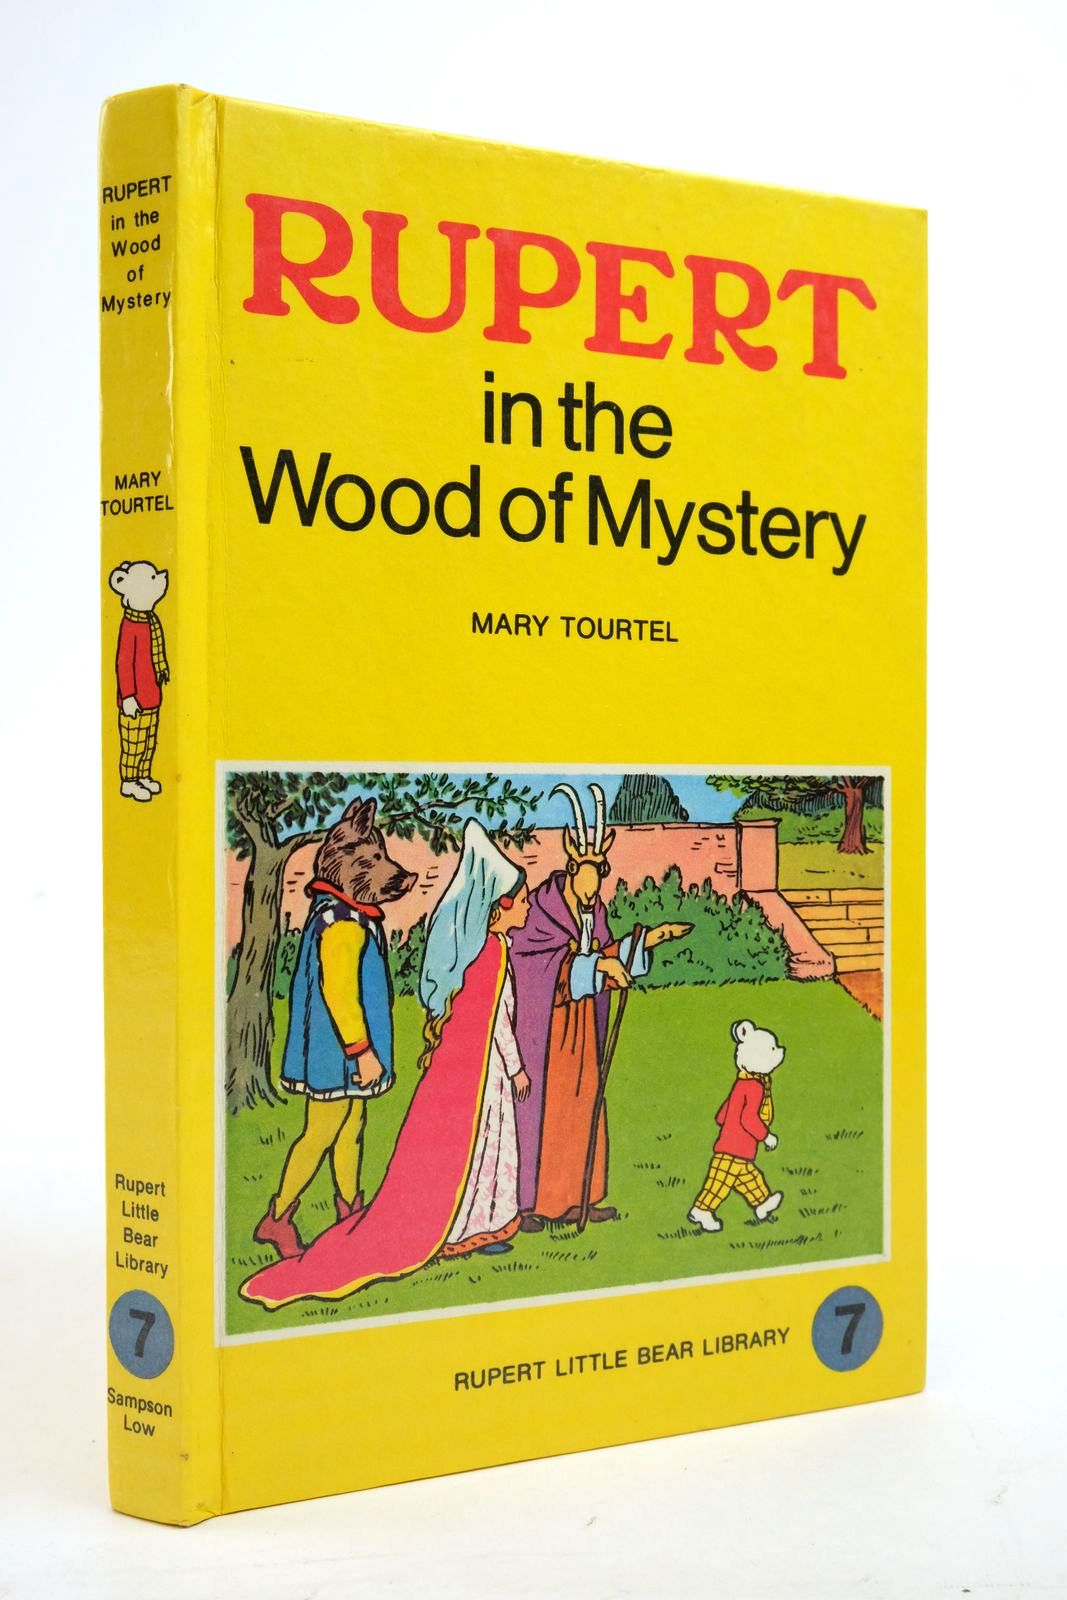 Photo of RUPERT IN THE WOOD OF MYSTERY - RUPERT LITTLE BEAR LIBRARY No. 7 (WOOLWORTH) written by Tourtel, Mary illustrated by Tourtel, Mary published by Sampson Low, Marston &amp; Co. Ltd. (STOCK CODE: 2136967)  for sale by Stella & Rose's Books